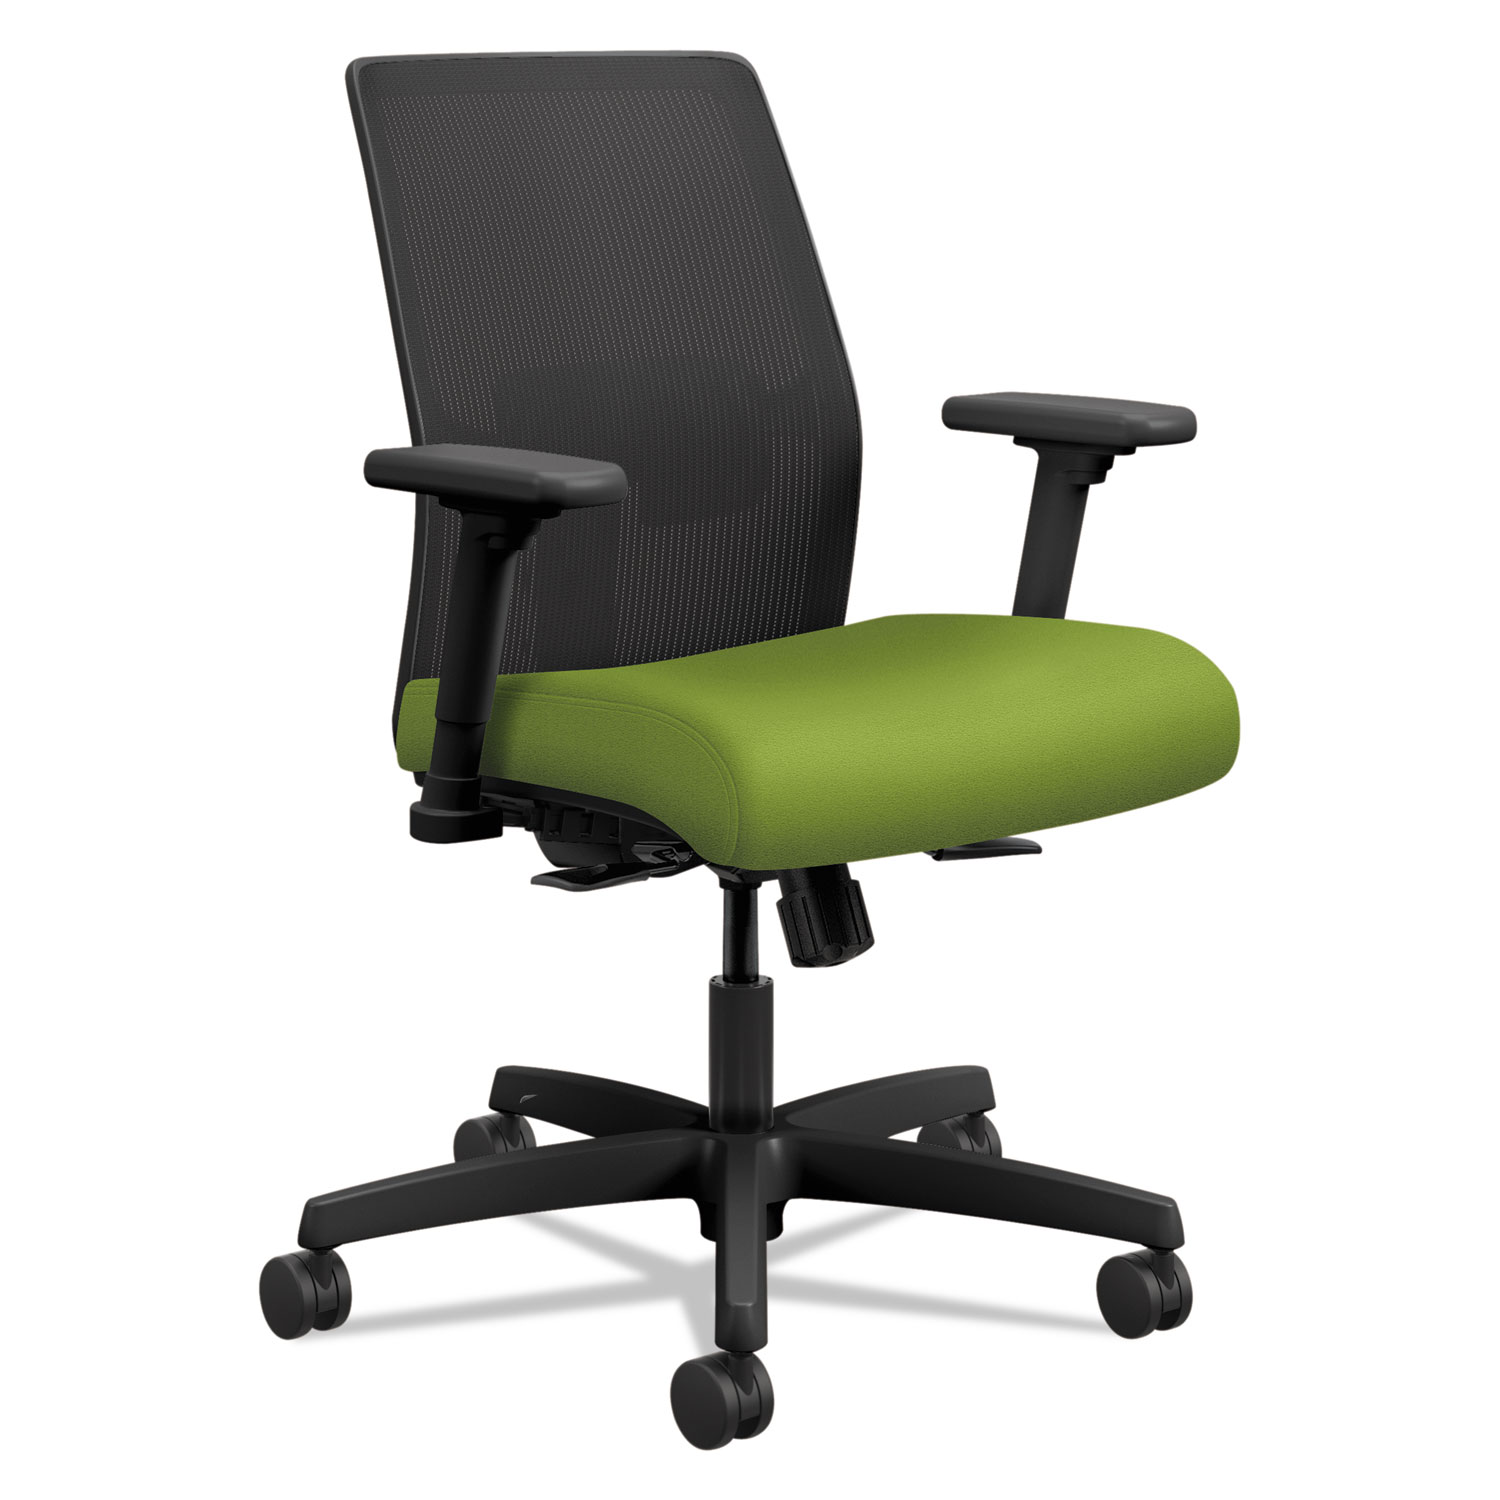  HON HONI2L1AMLC84TK Ignition 2.0 4-Way Stretch Low-Back Mesh Task Chair, Supports up to 300 lbs., Pear Seat, Black Back/Base (HONI2L1AMLC84TK) 